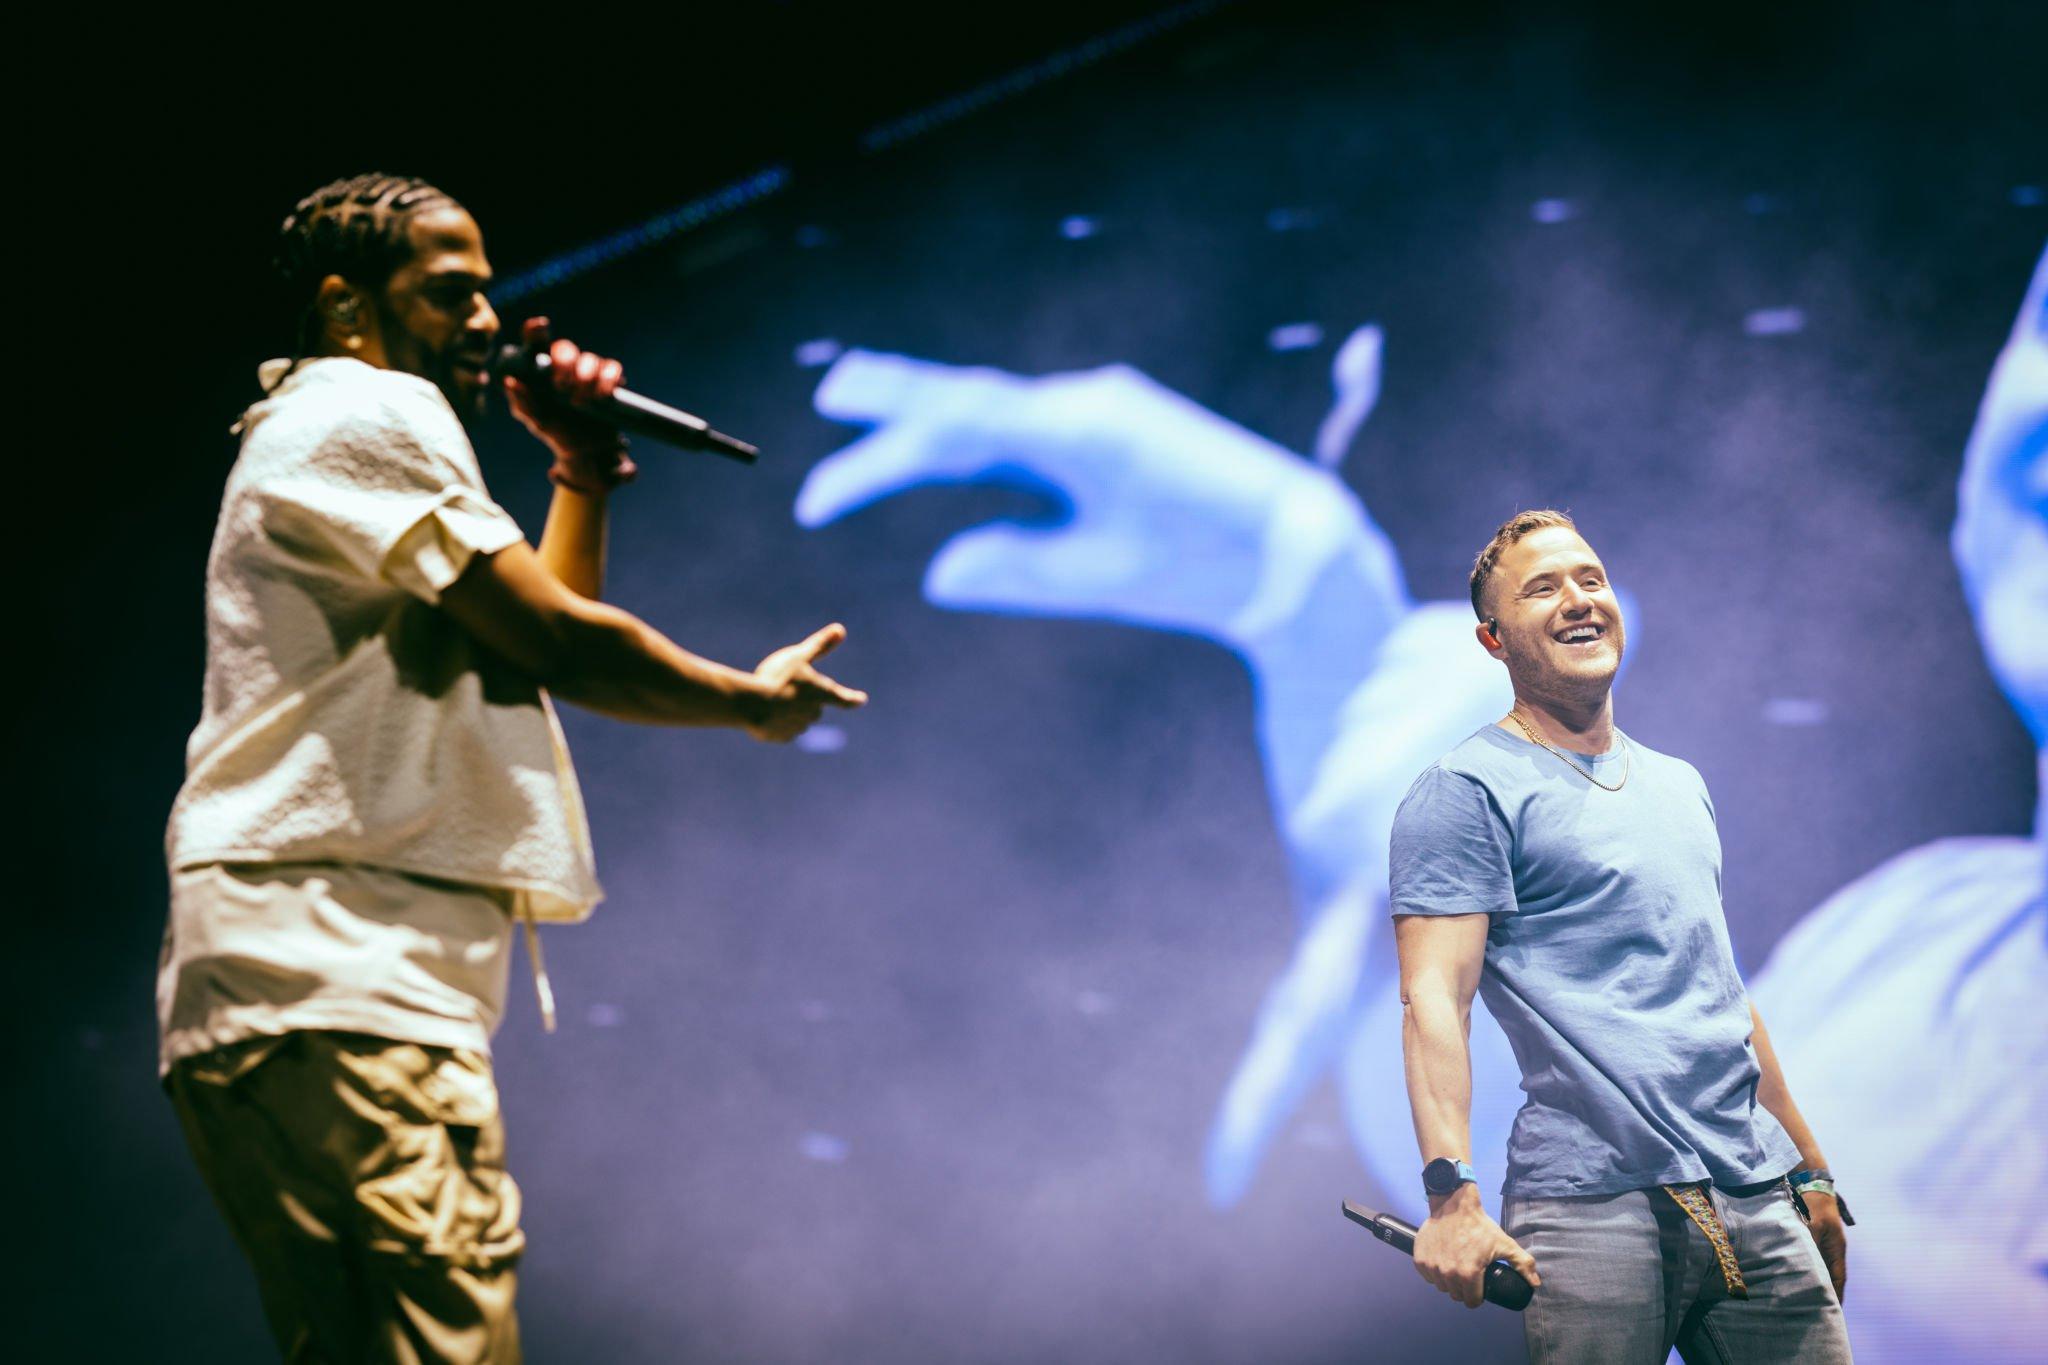 Mike Posner joins Big Sean onstage at 2022 Coachella to perform "Cooler Than Me"
